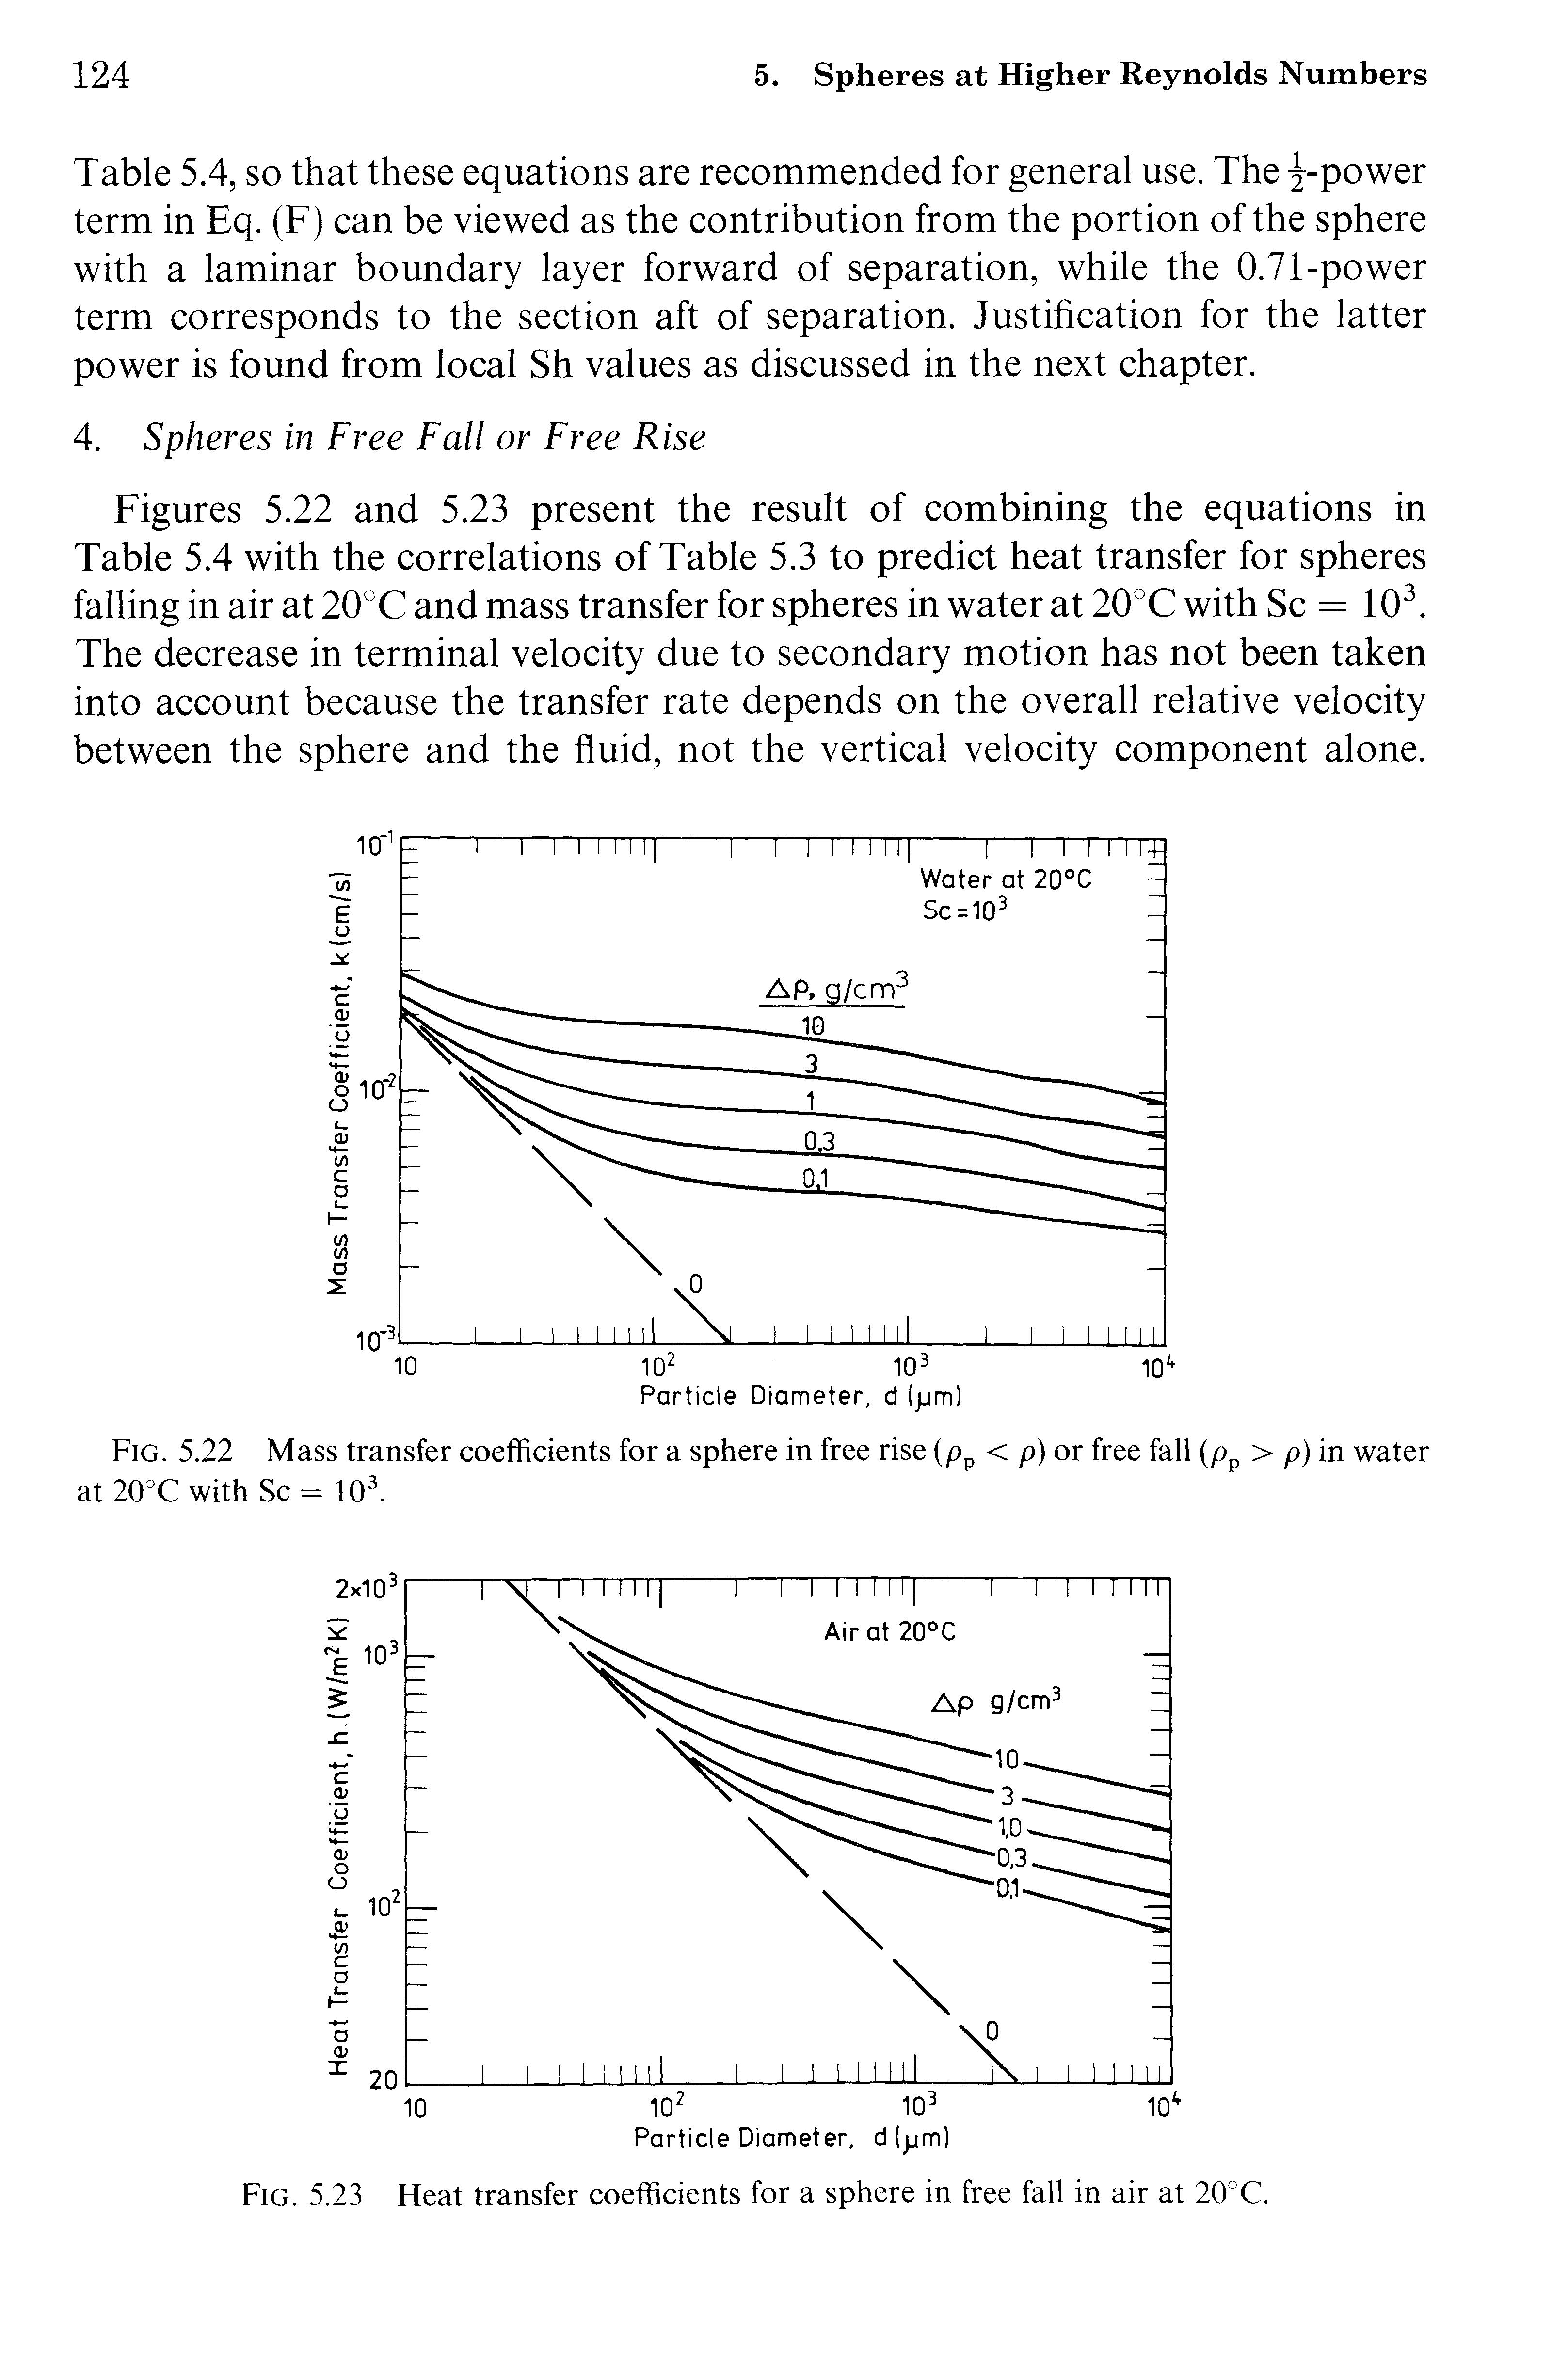 Figures 5.22 and 5.23 present the result of combining the equations in Table 5.4 with the correlations of Table 5.3 to predict heat transfer for spheres falling in air at 20 C and mass transfer for spheres in water at 20 C with Sc = 10. The decrease in terminal velocity due to secondary motion has not been taken into account because the transfer rate depends on the overall relative velocity between the sphere and the fluid, not the vertical velocity component alone.